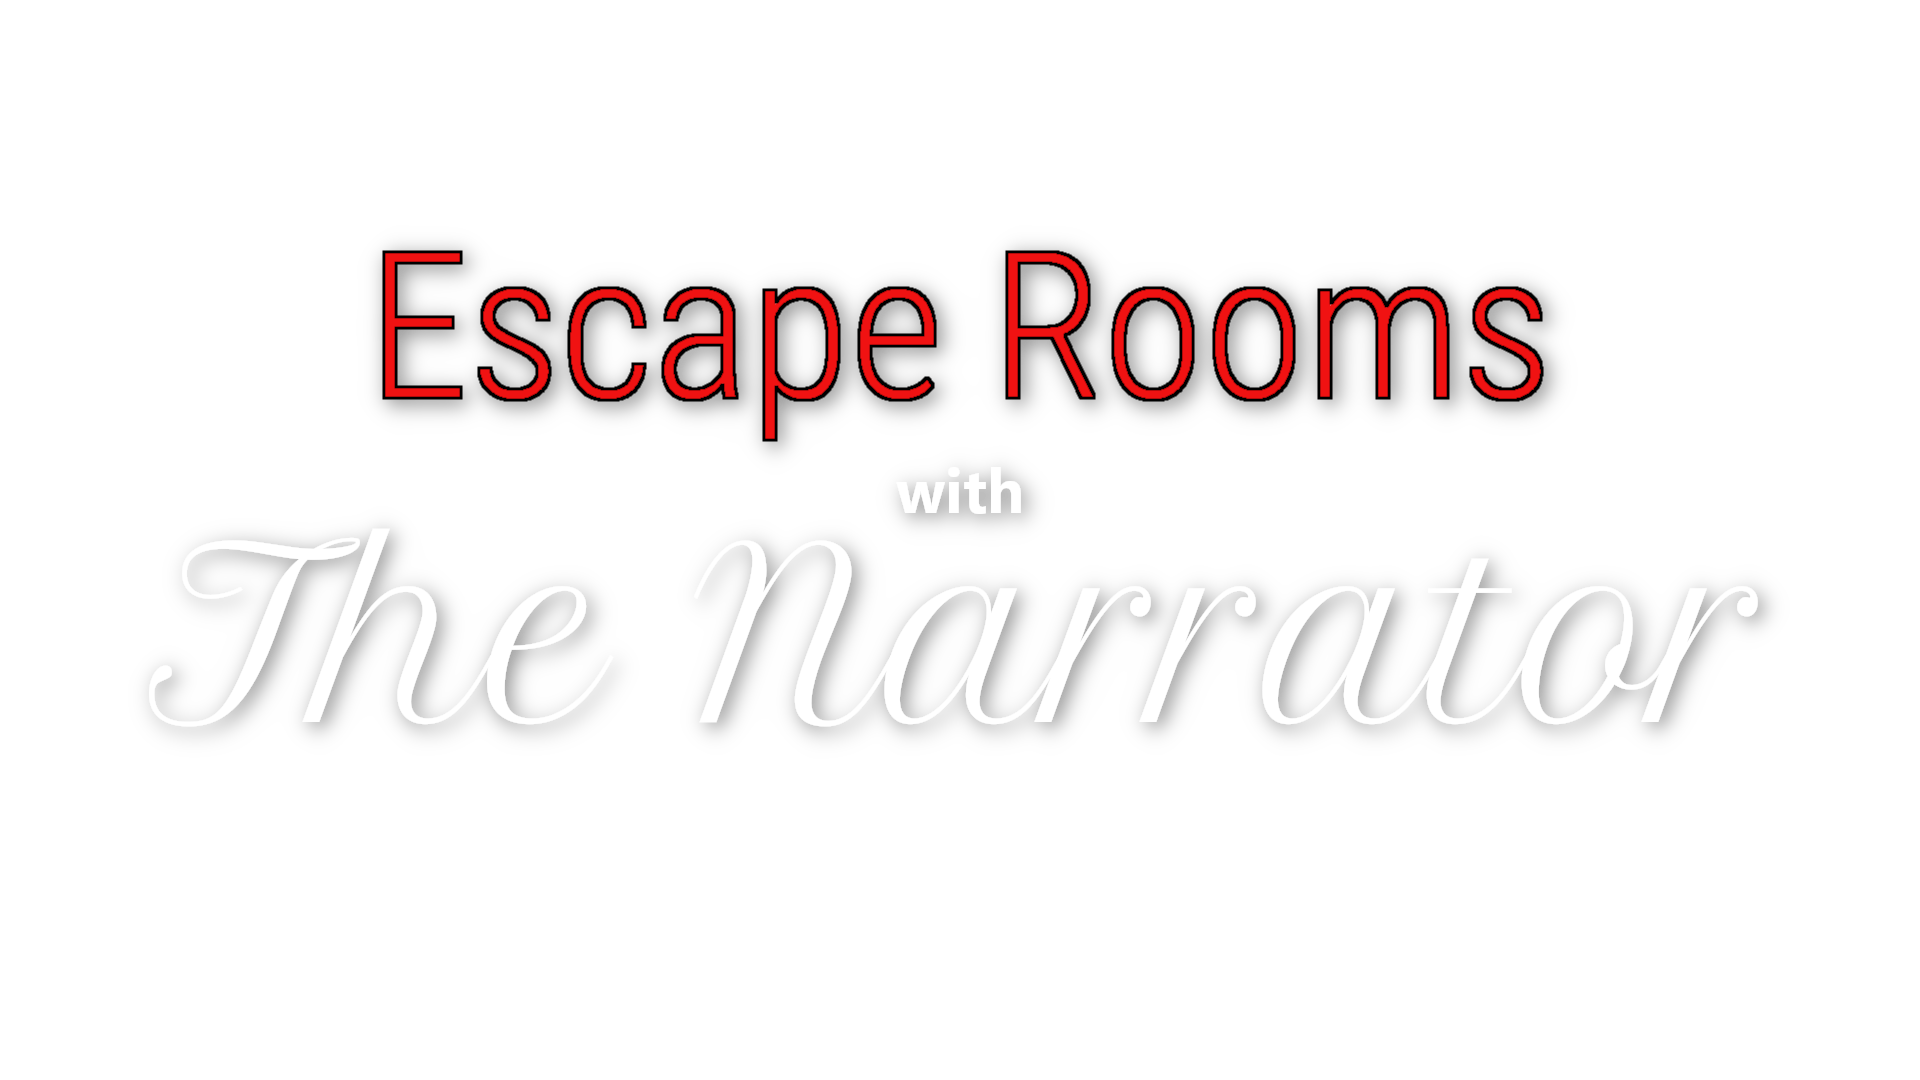 Escape Rooms With The Narrator - Chapter 1